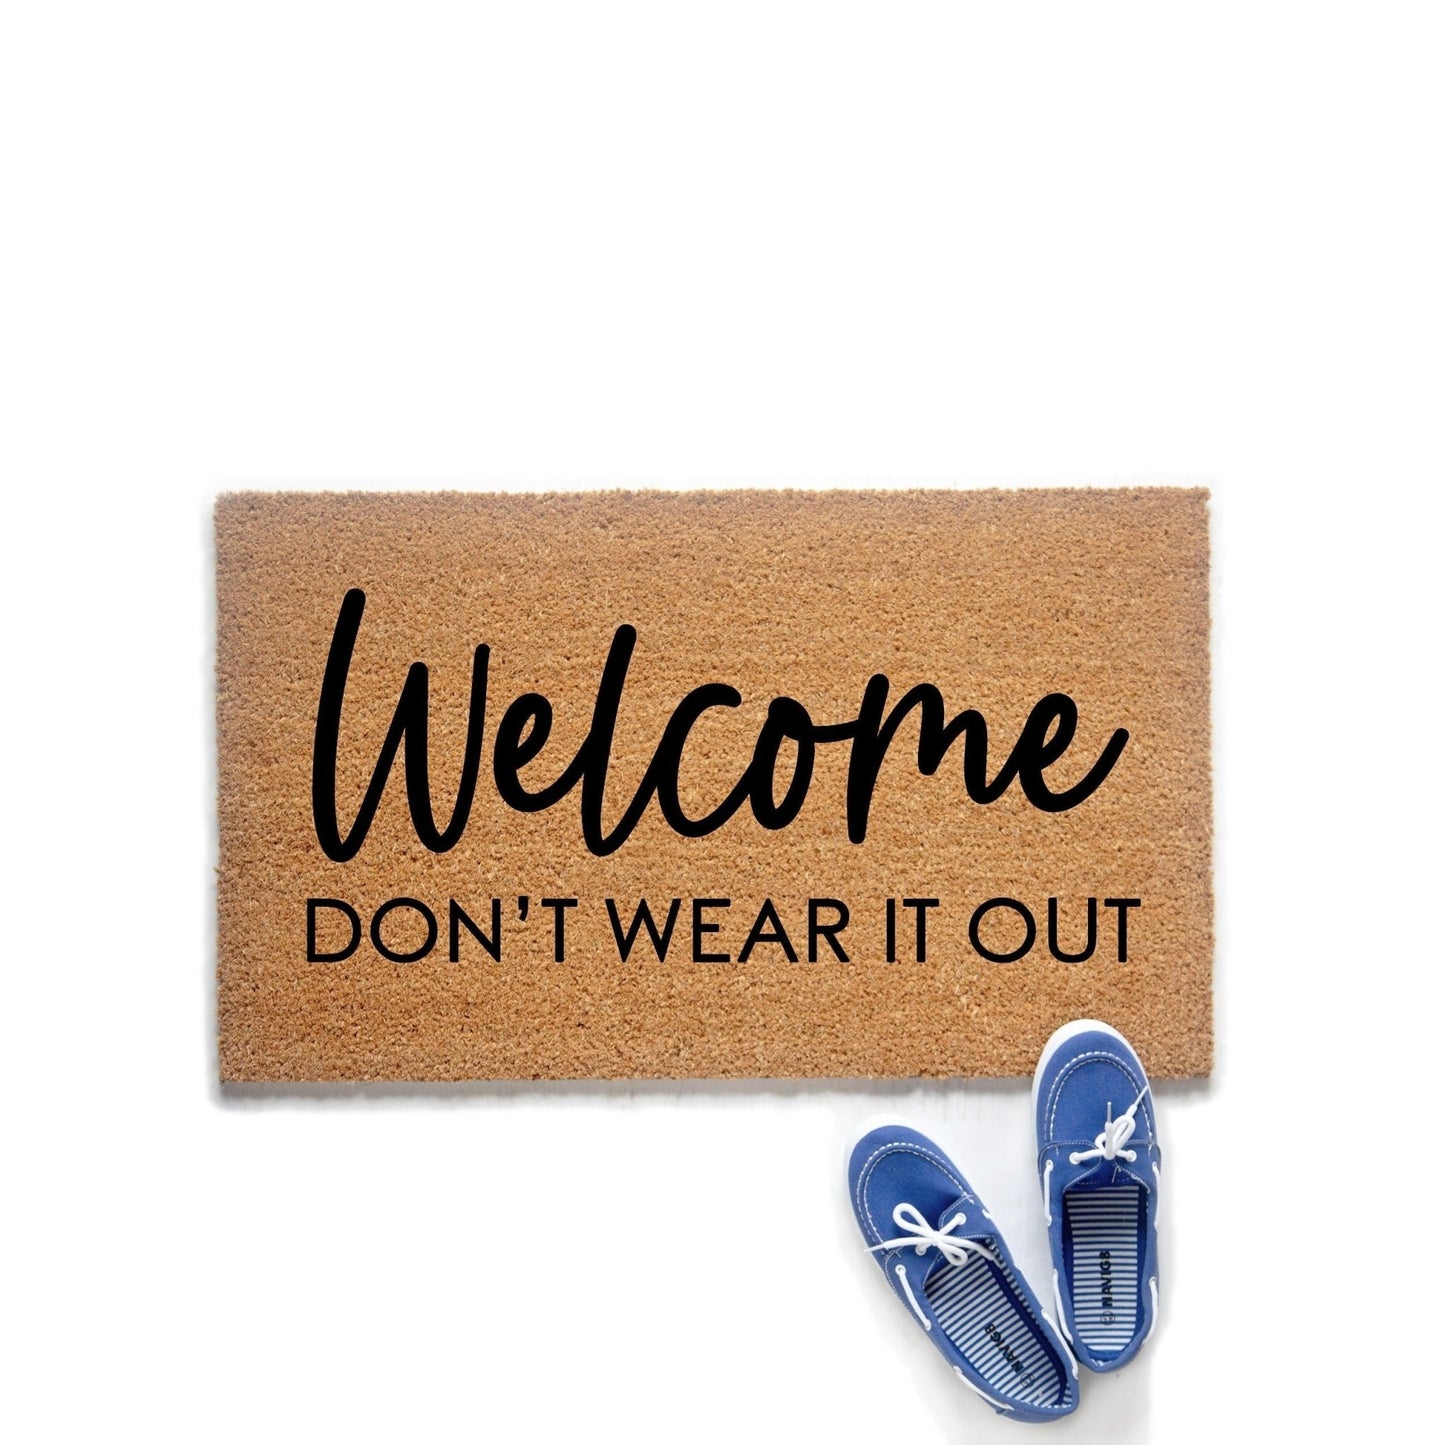 Welcome Don't Wear It Out Doormat